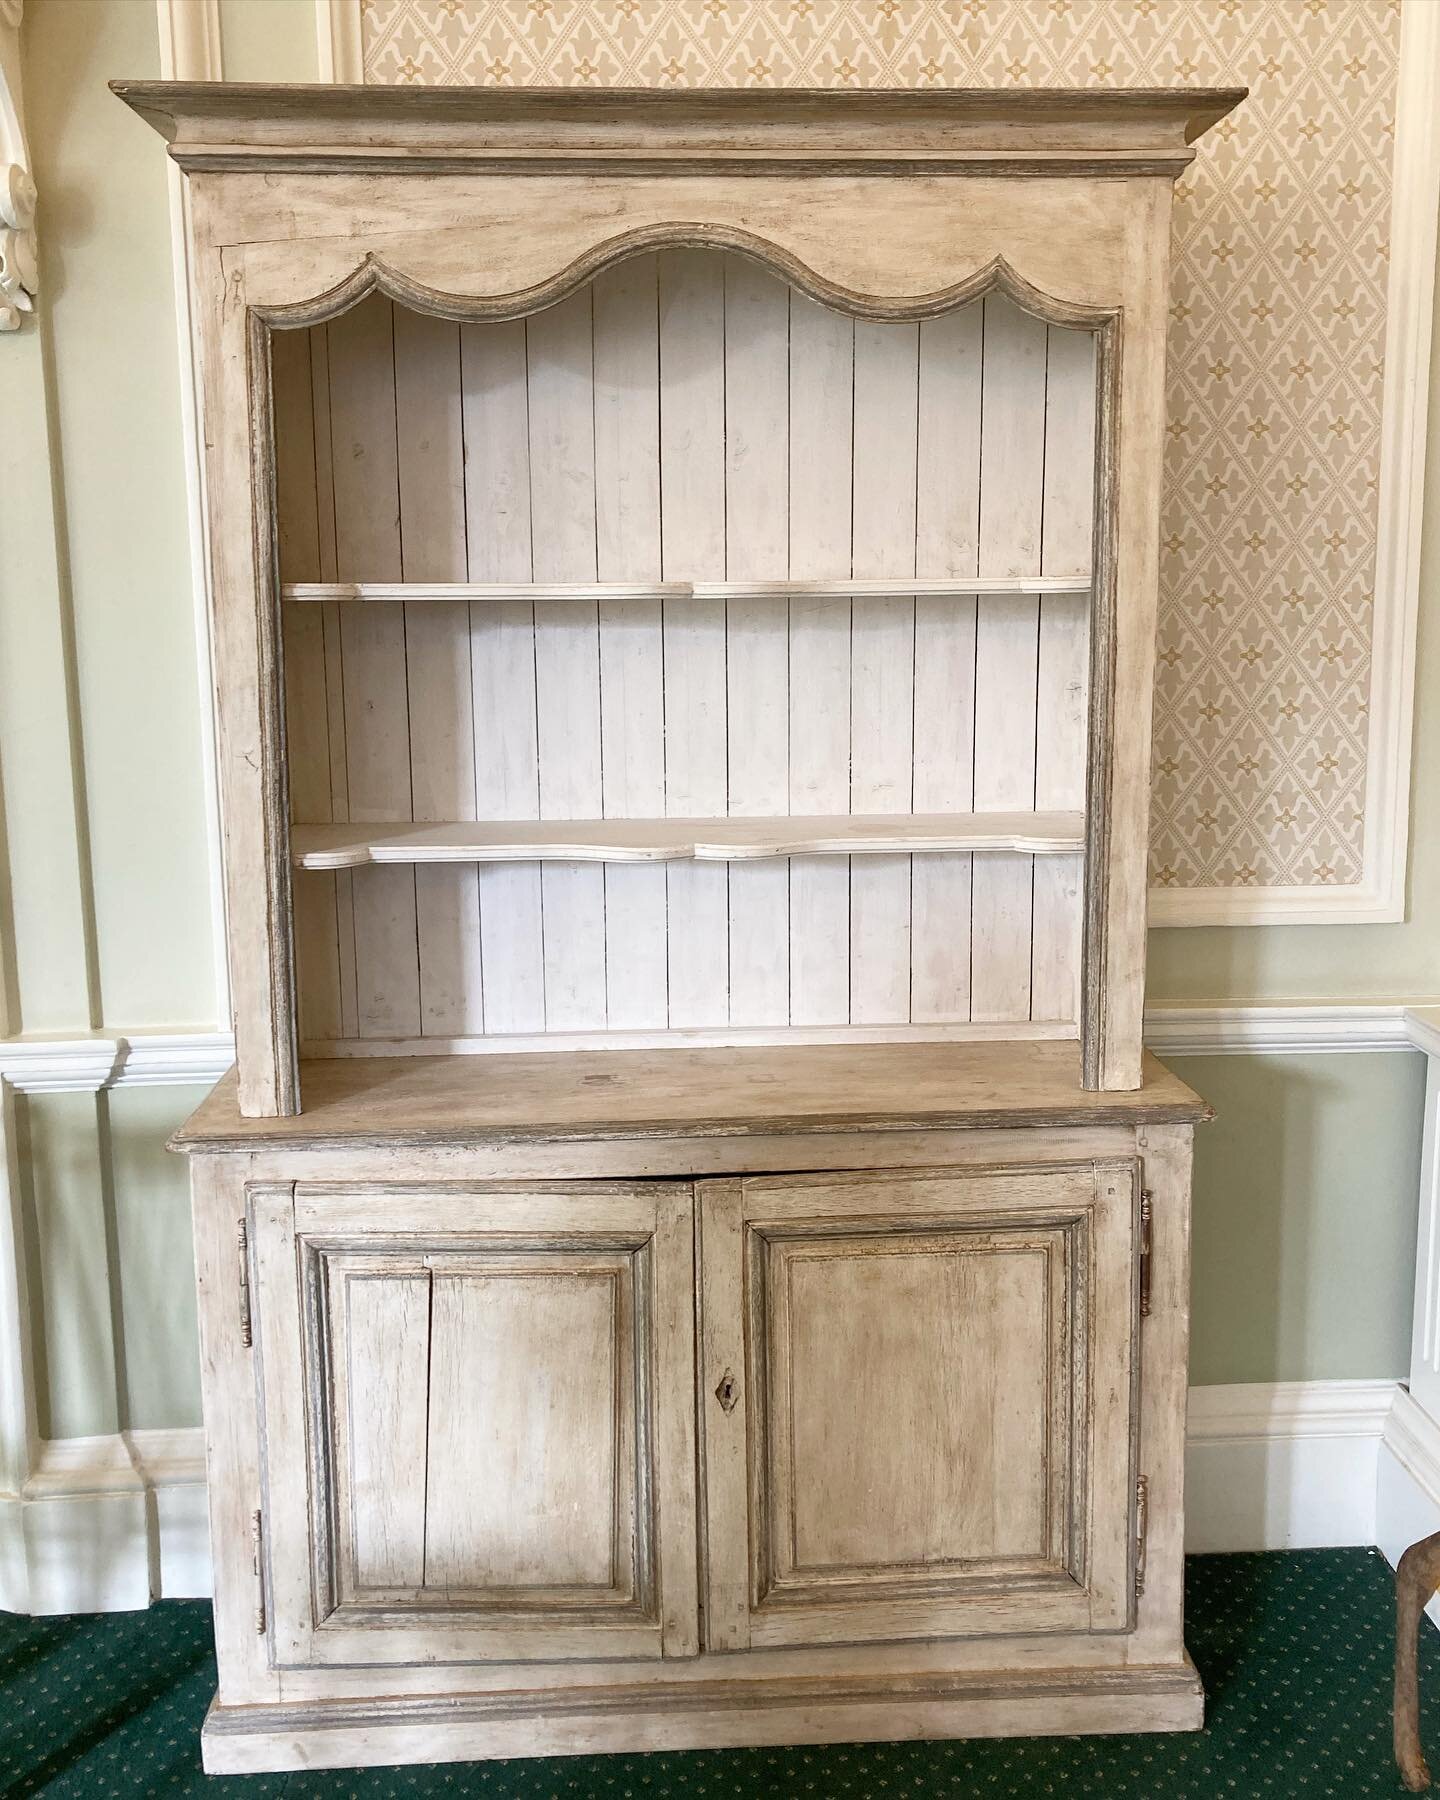 Super 18th Century French dresser spotted @chelseatextiles sale today with @calliehollenden - message me for price and dimensions #ifitticklesyourfancy